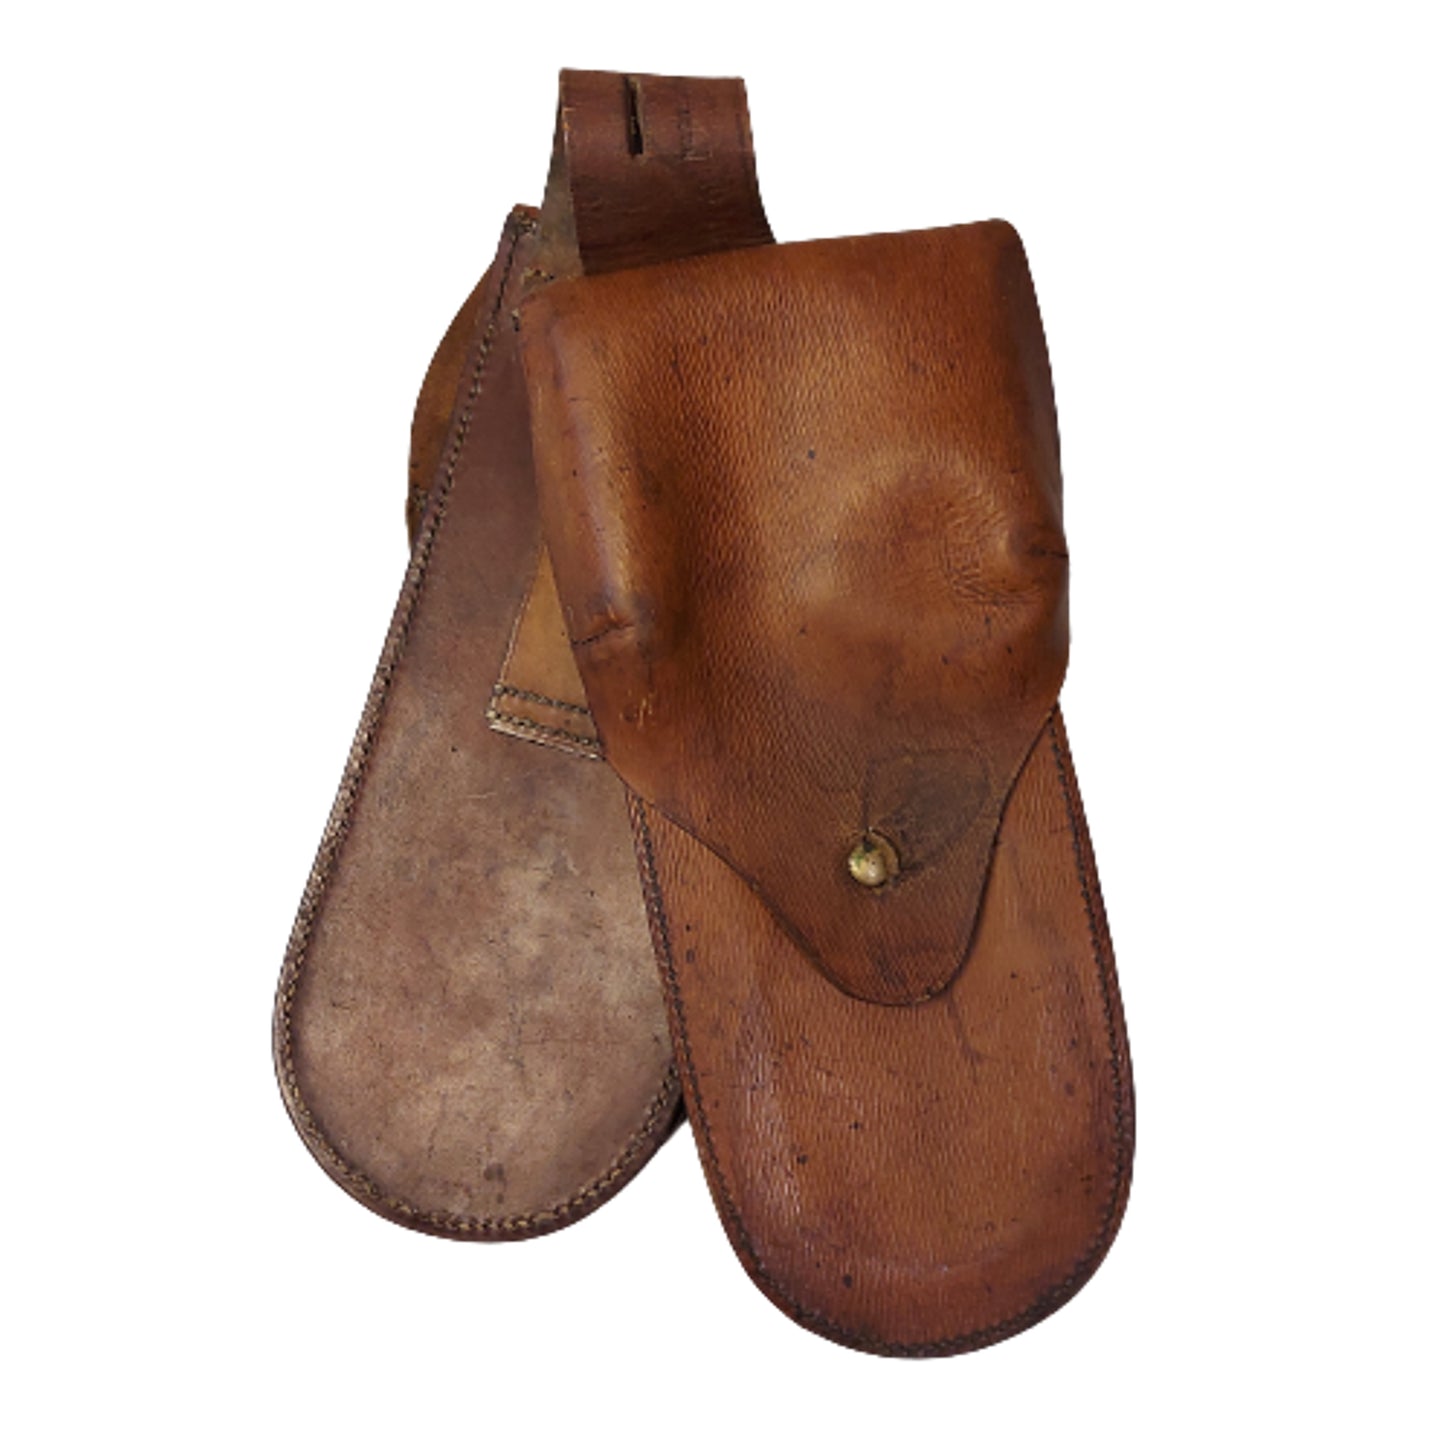 WW1 Canadian Cavalry Officer's Saddle Bags